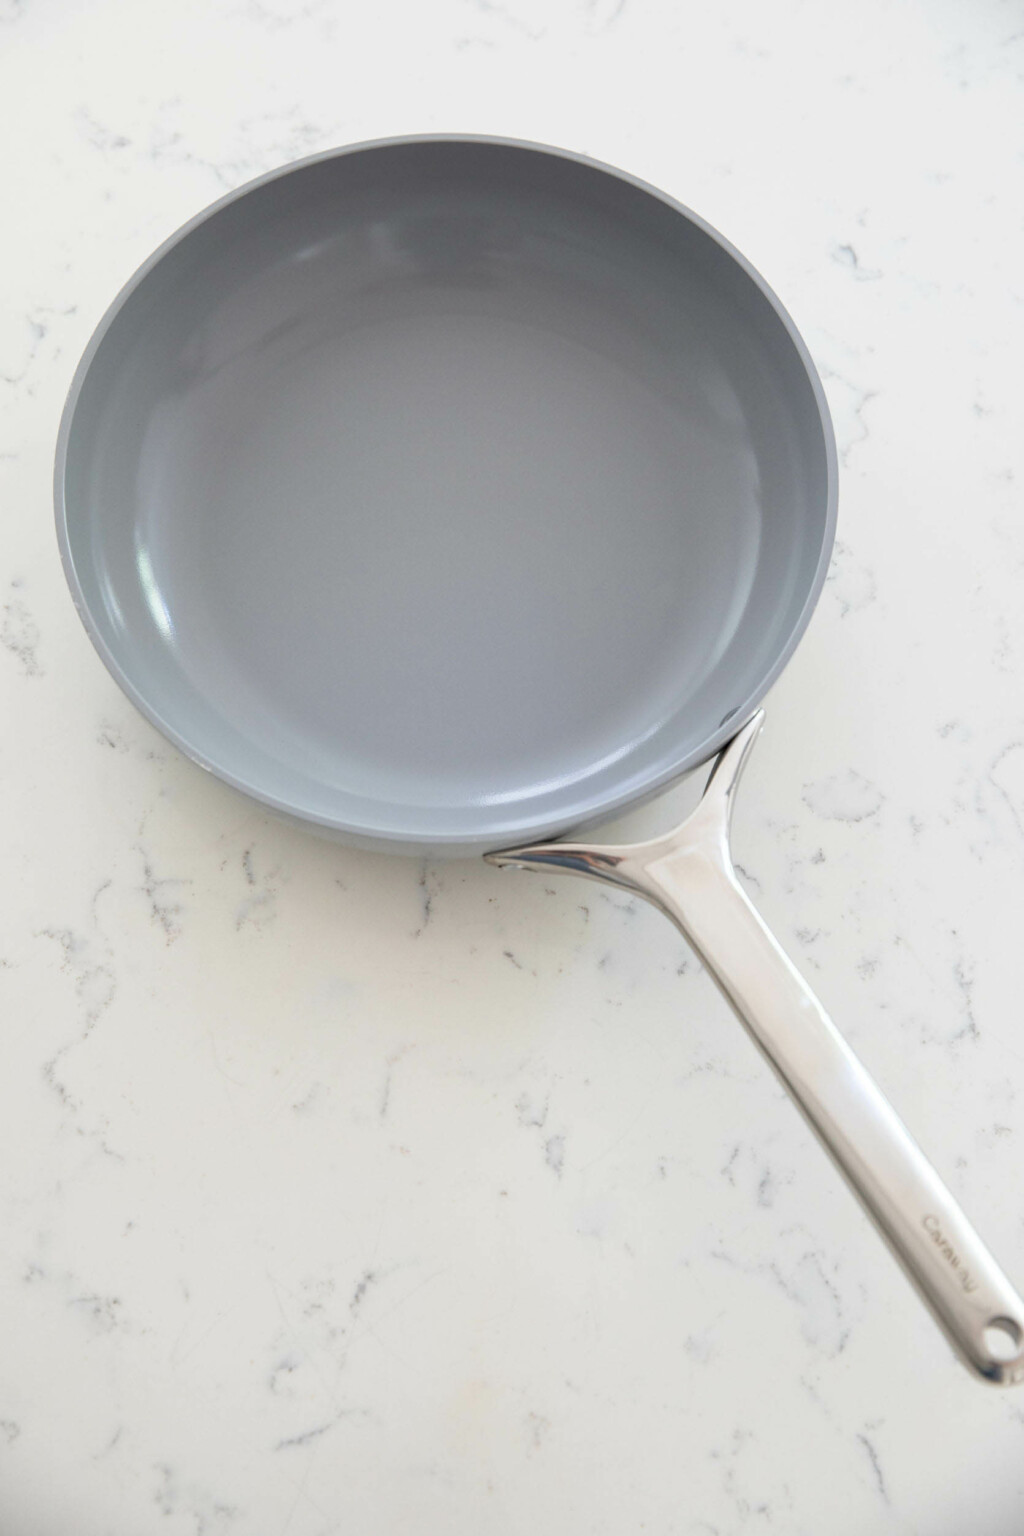 A gray frying pan rests on a white, marbled surface.